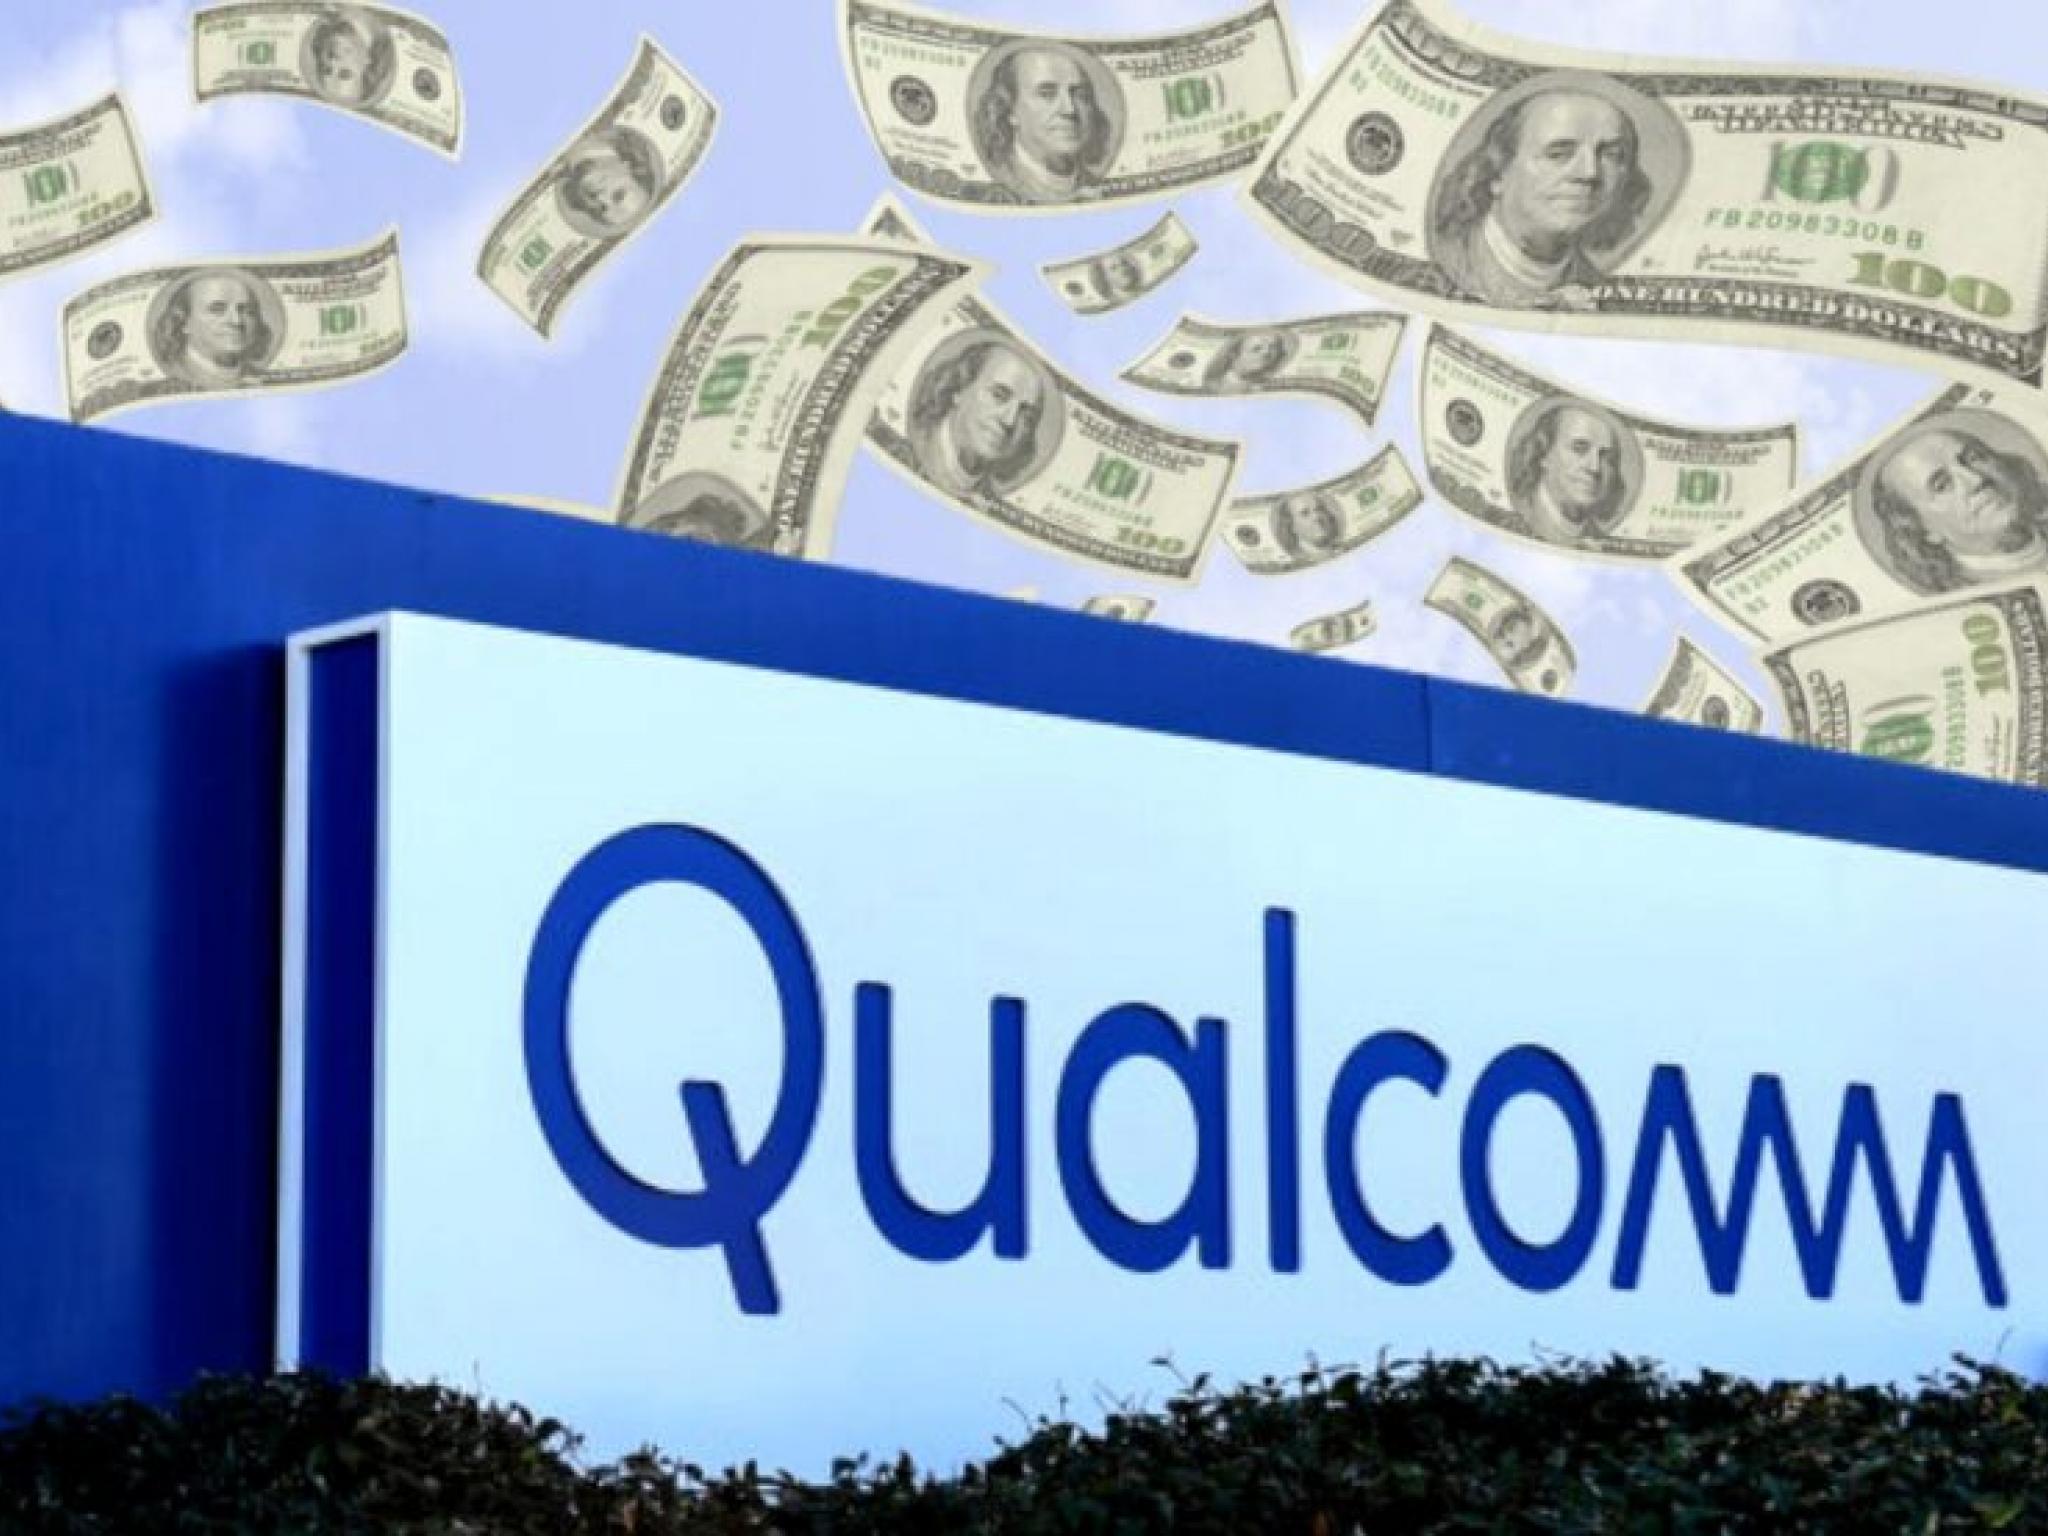  qualcomm-to-rally-around-22-here-are-10-top-analyst-forecasts-for-thursday 